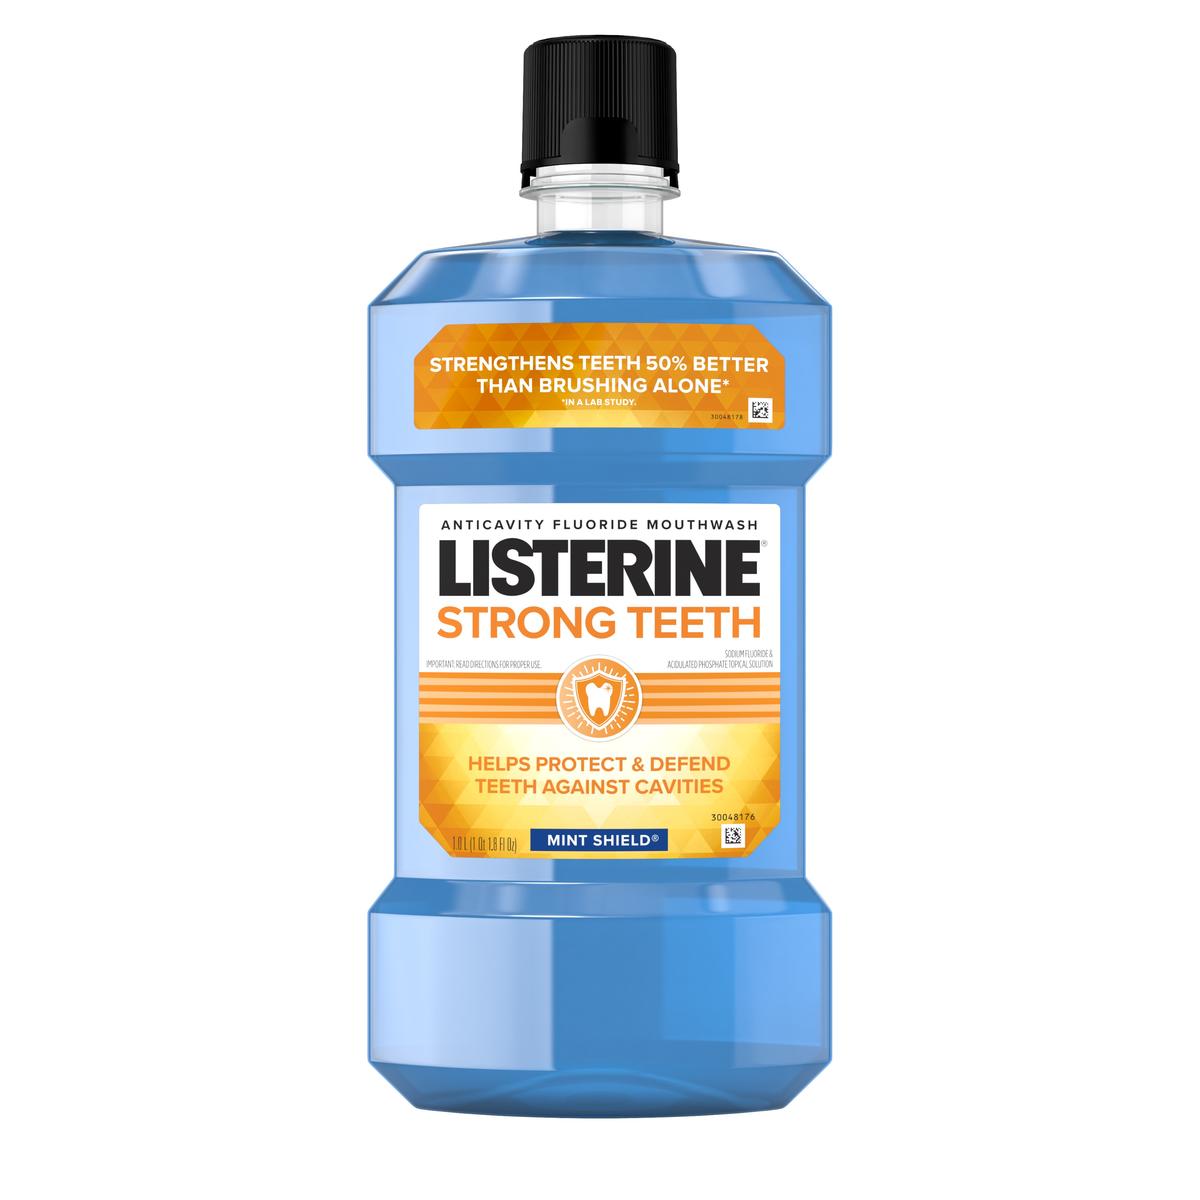 LISTERINE® STRONG TEETH Anticavity Fluoride Mouthwash MINT SHIELD front